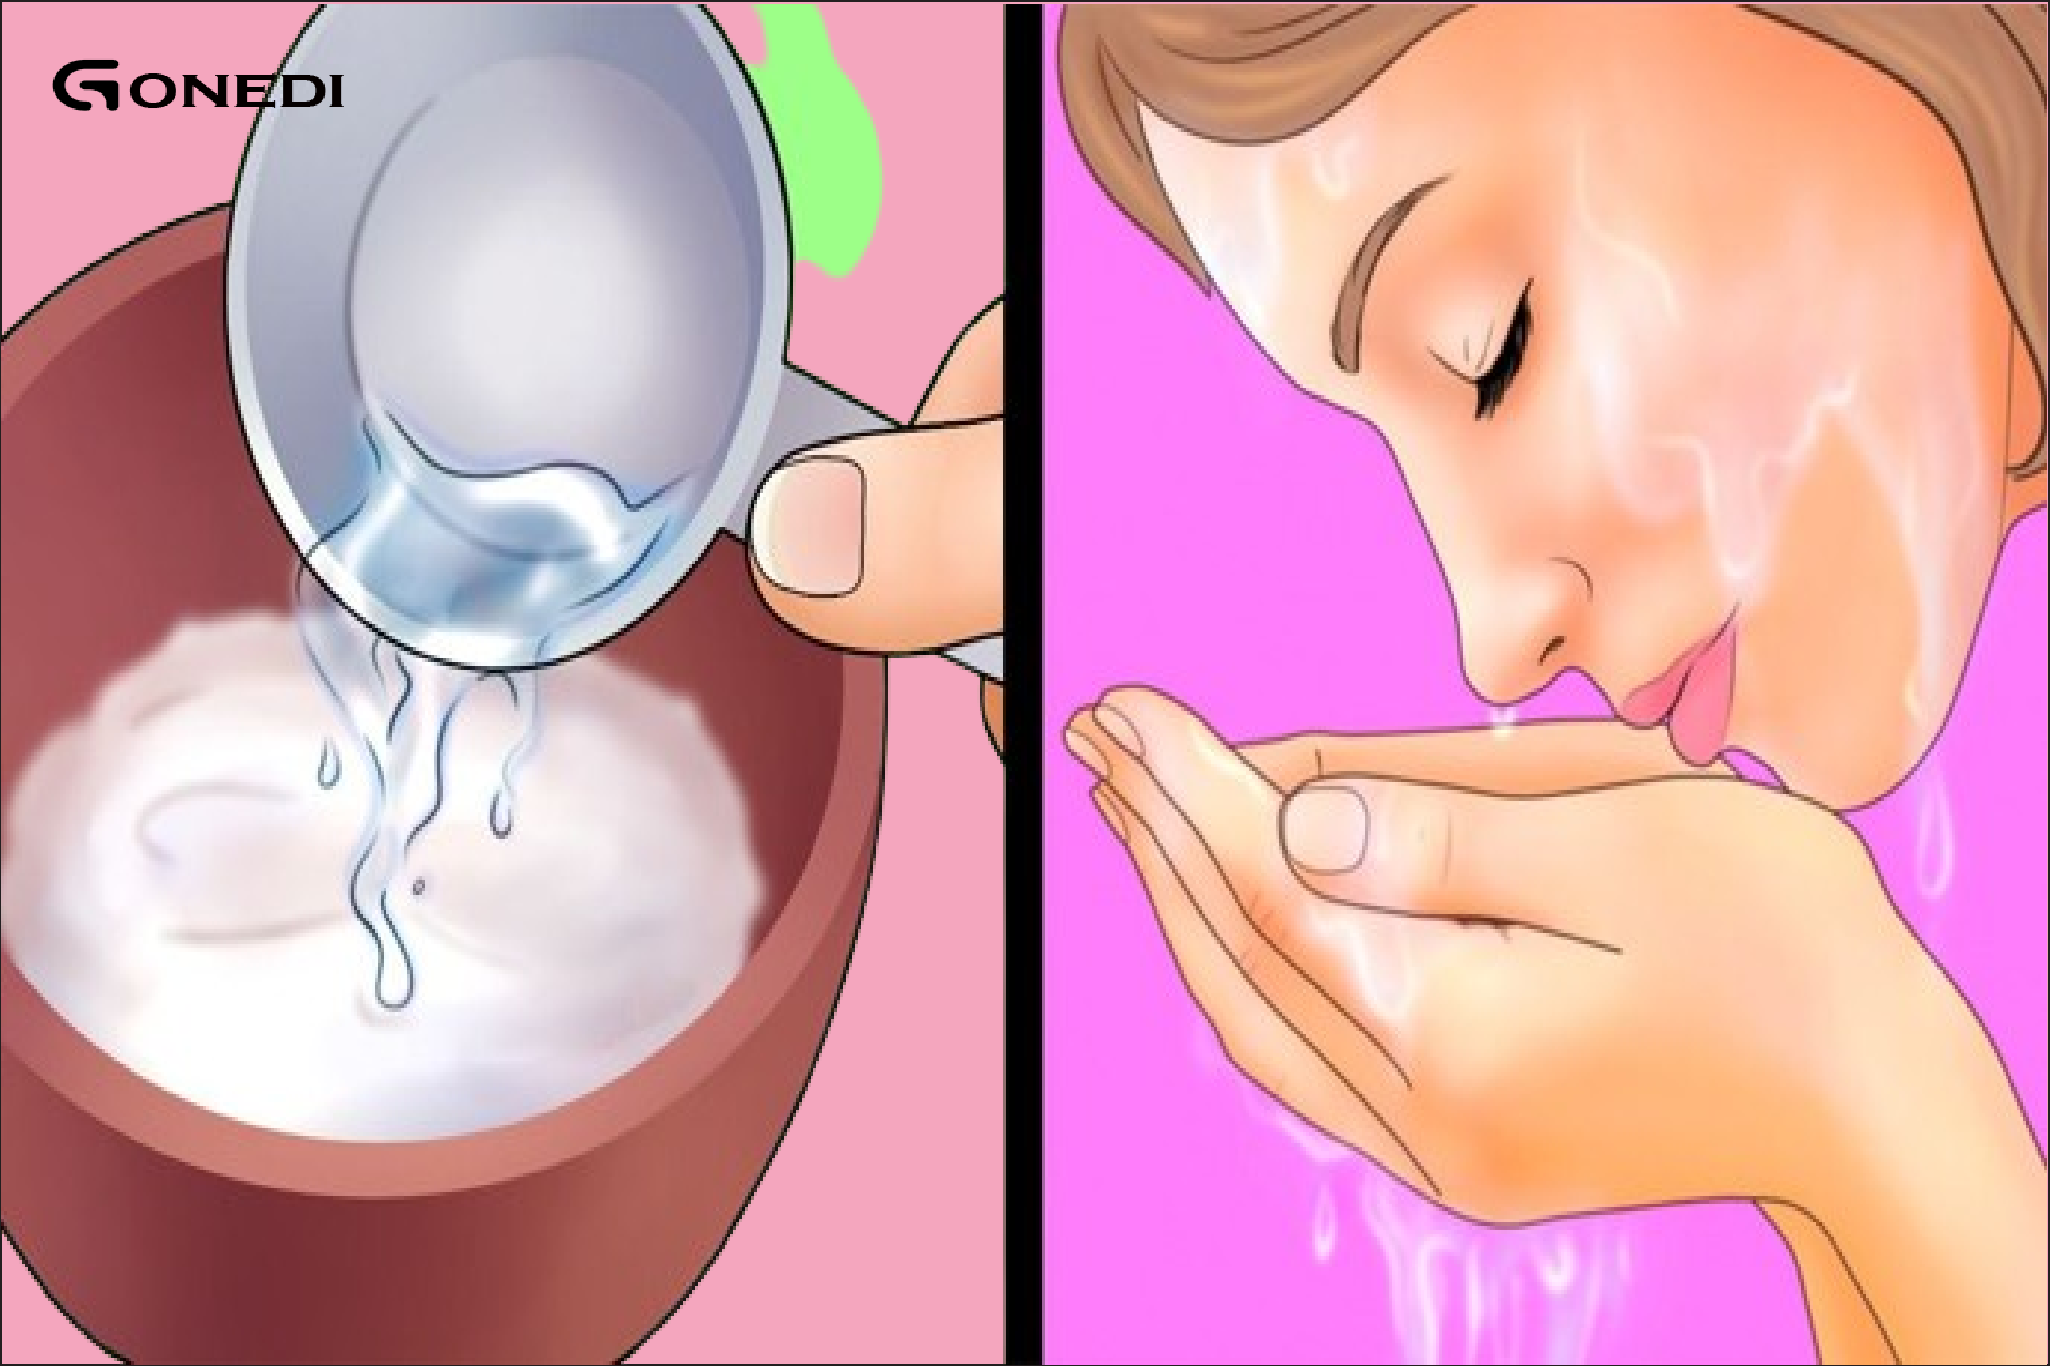 Every woman should know these amazing tricks using baking soda!